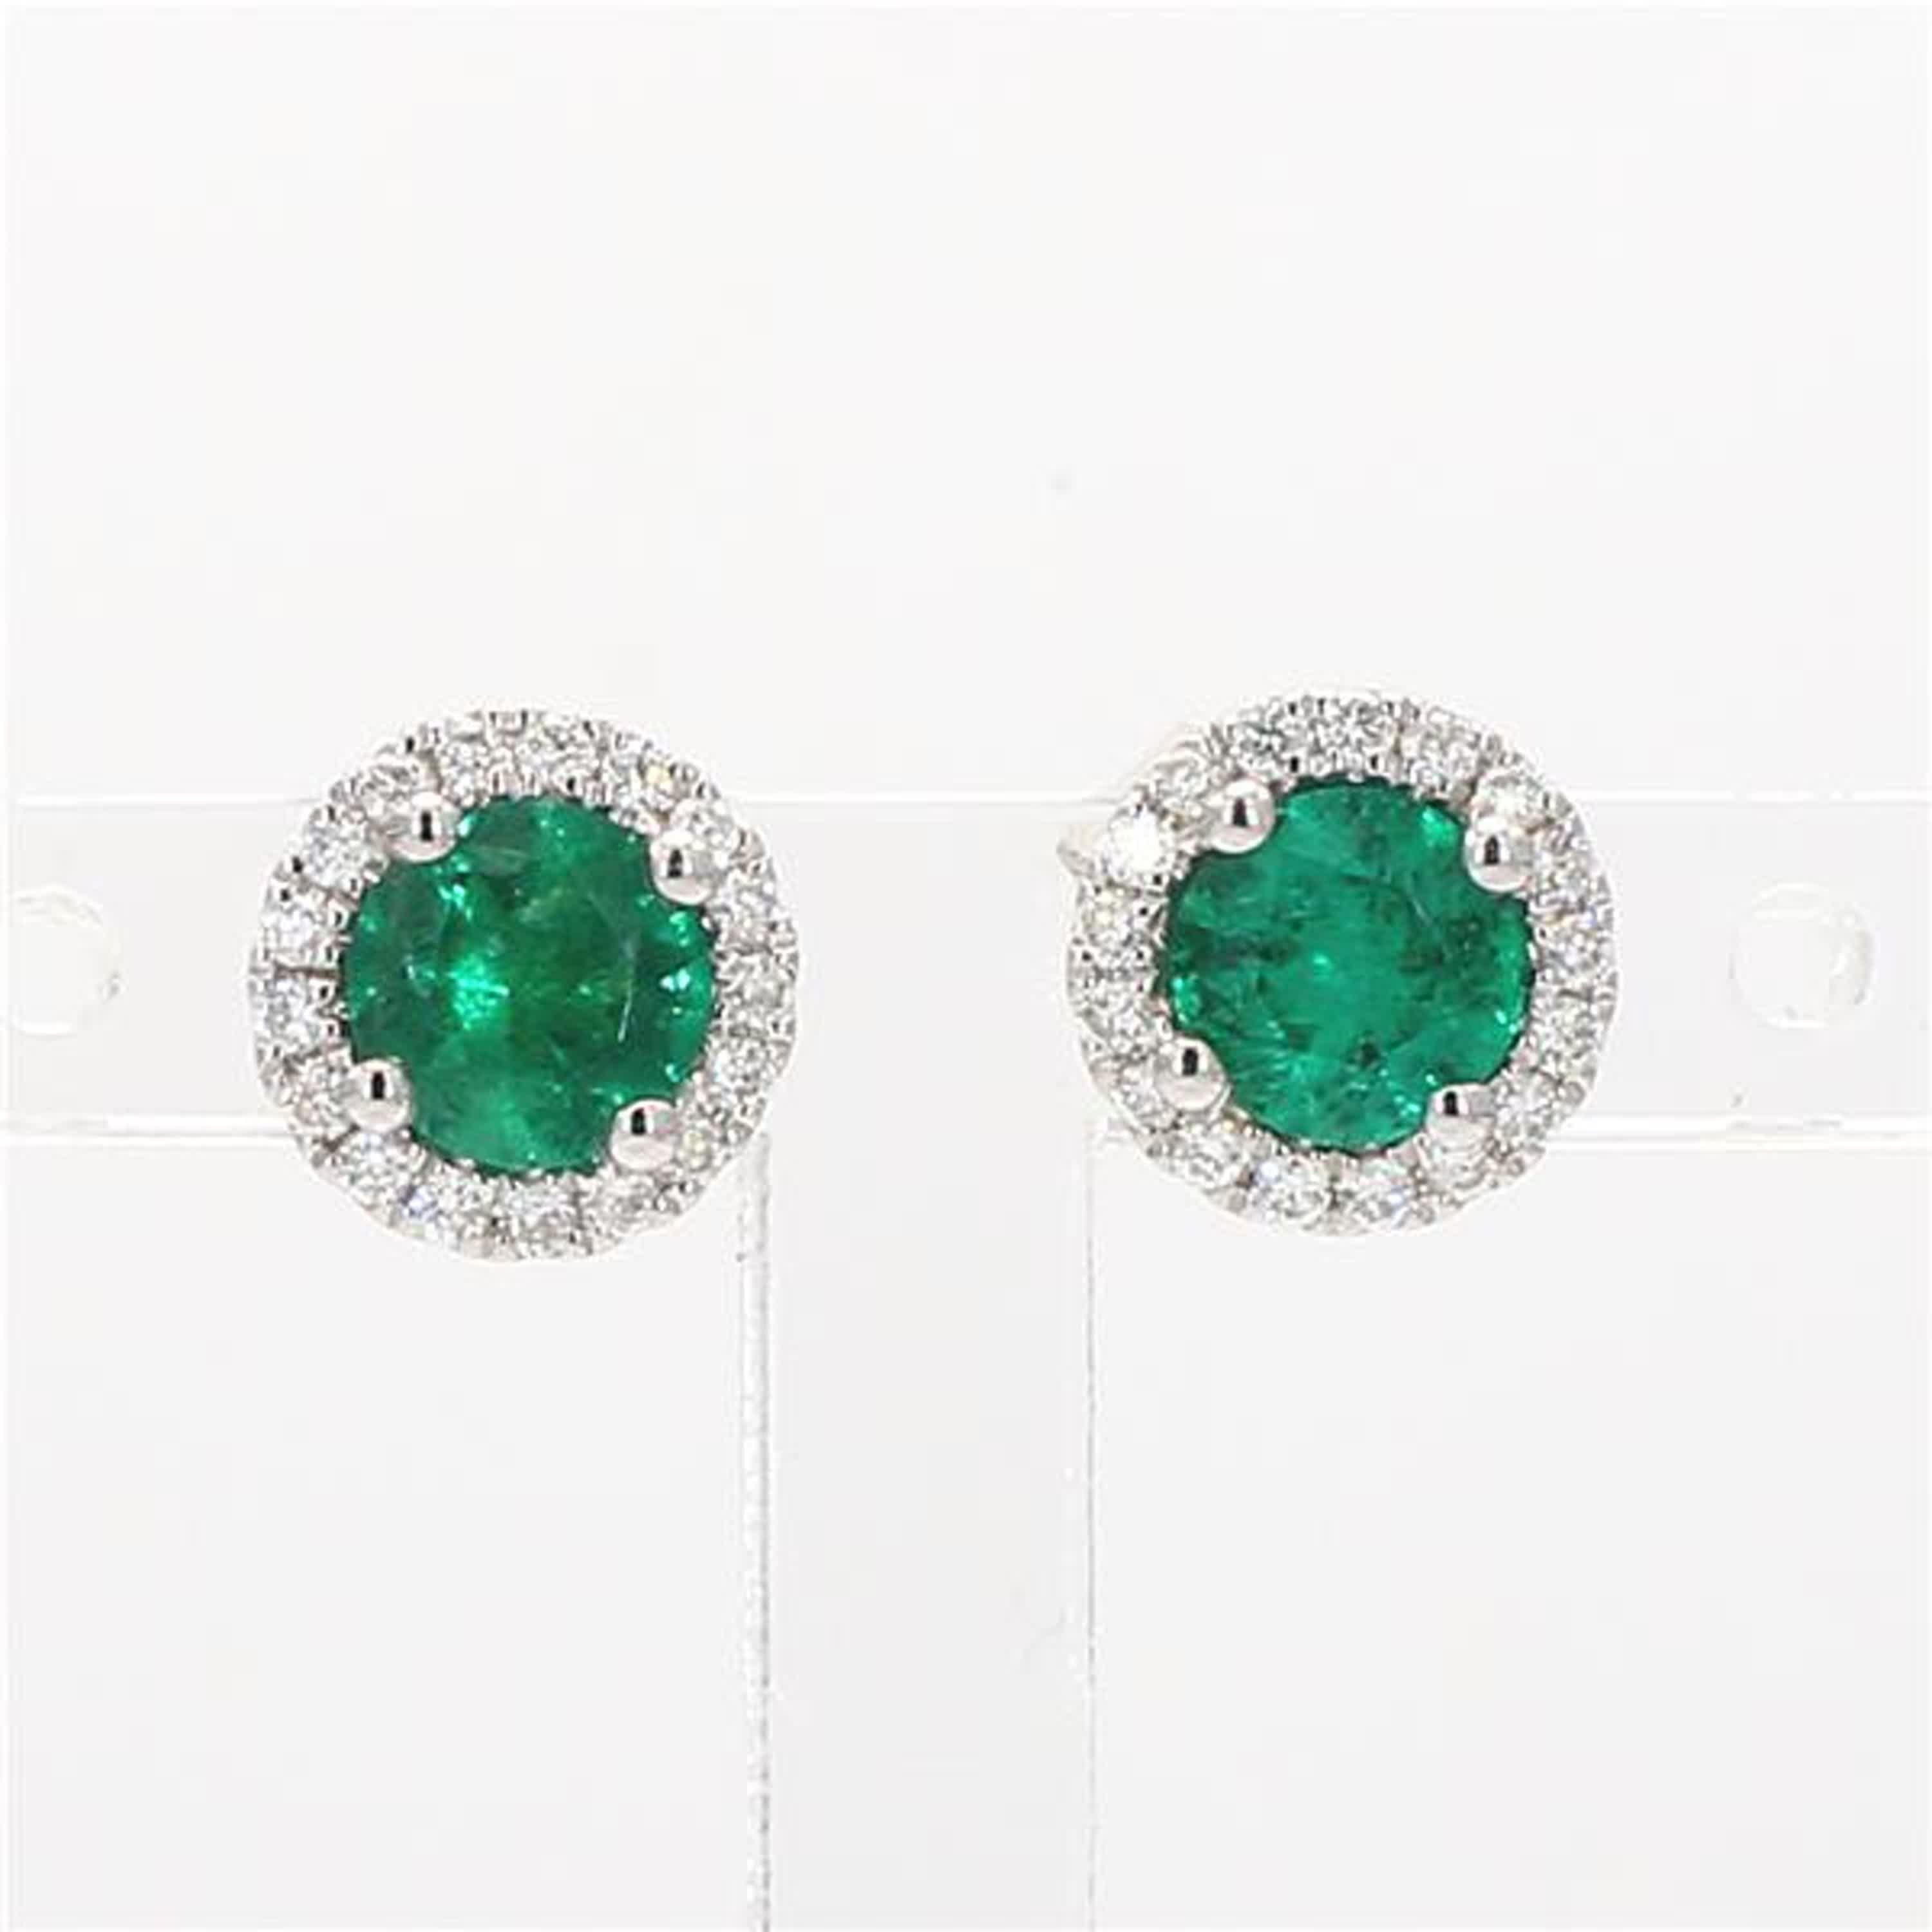 RareGemWorld's classic emerald earrings. Mounted in a beautiful 14K White Gold setting with natural round cut green emerald's. The emerald's are surrounded by natural round white diamond melee in a beautiful single halo. These earrings are